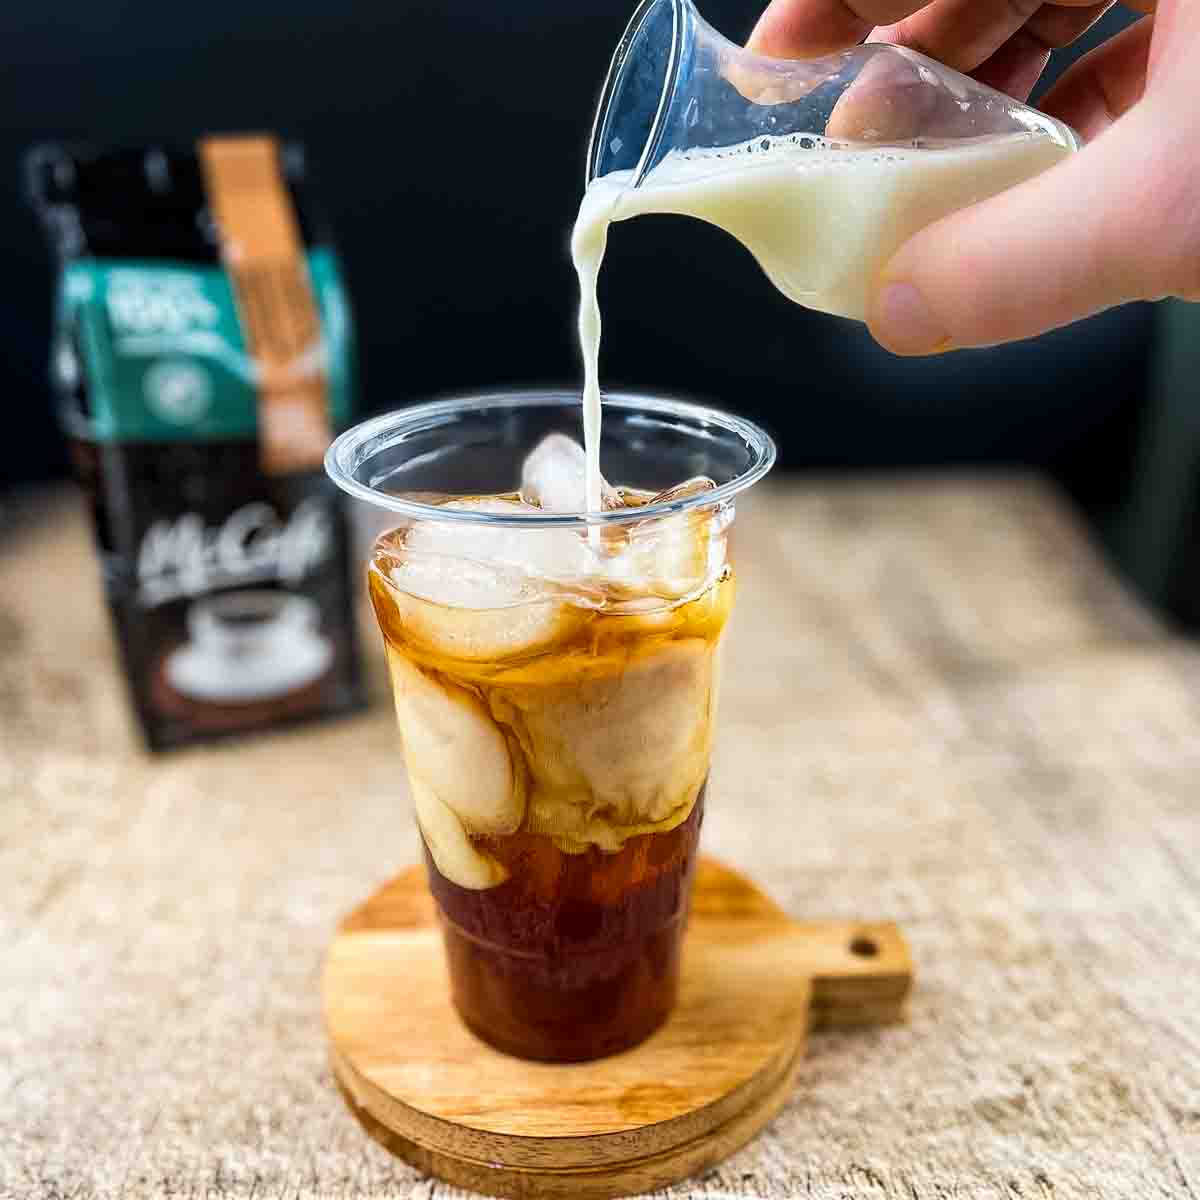 Milk being poured into the glass with the coffee, syrup, and ice cubes.